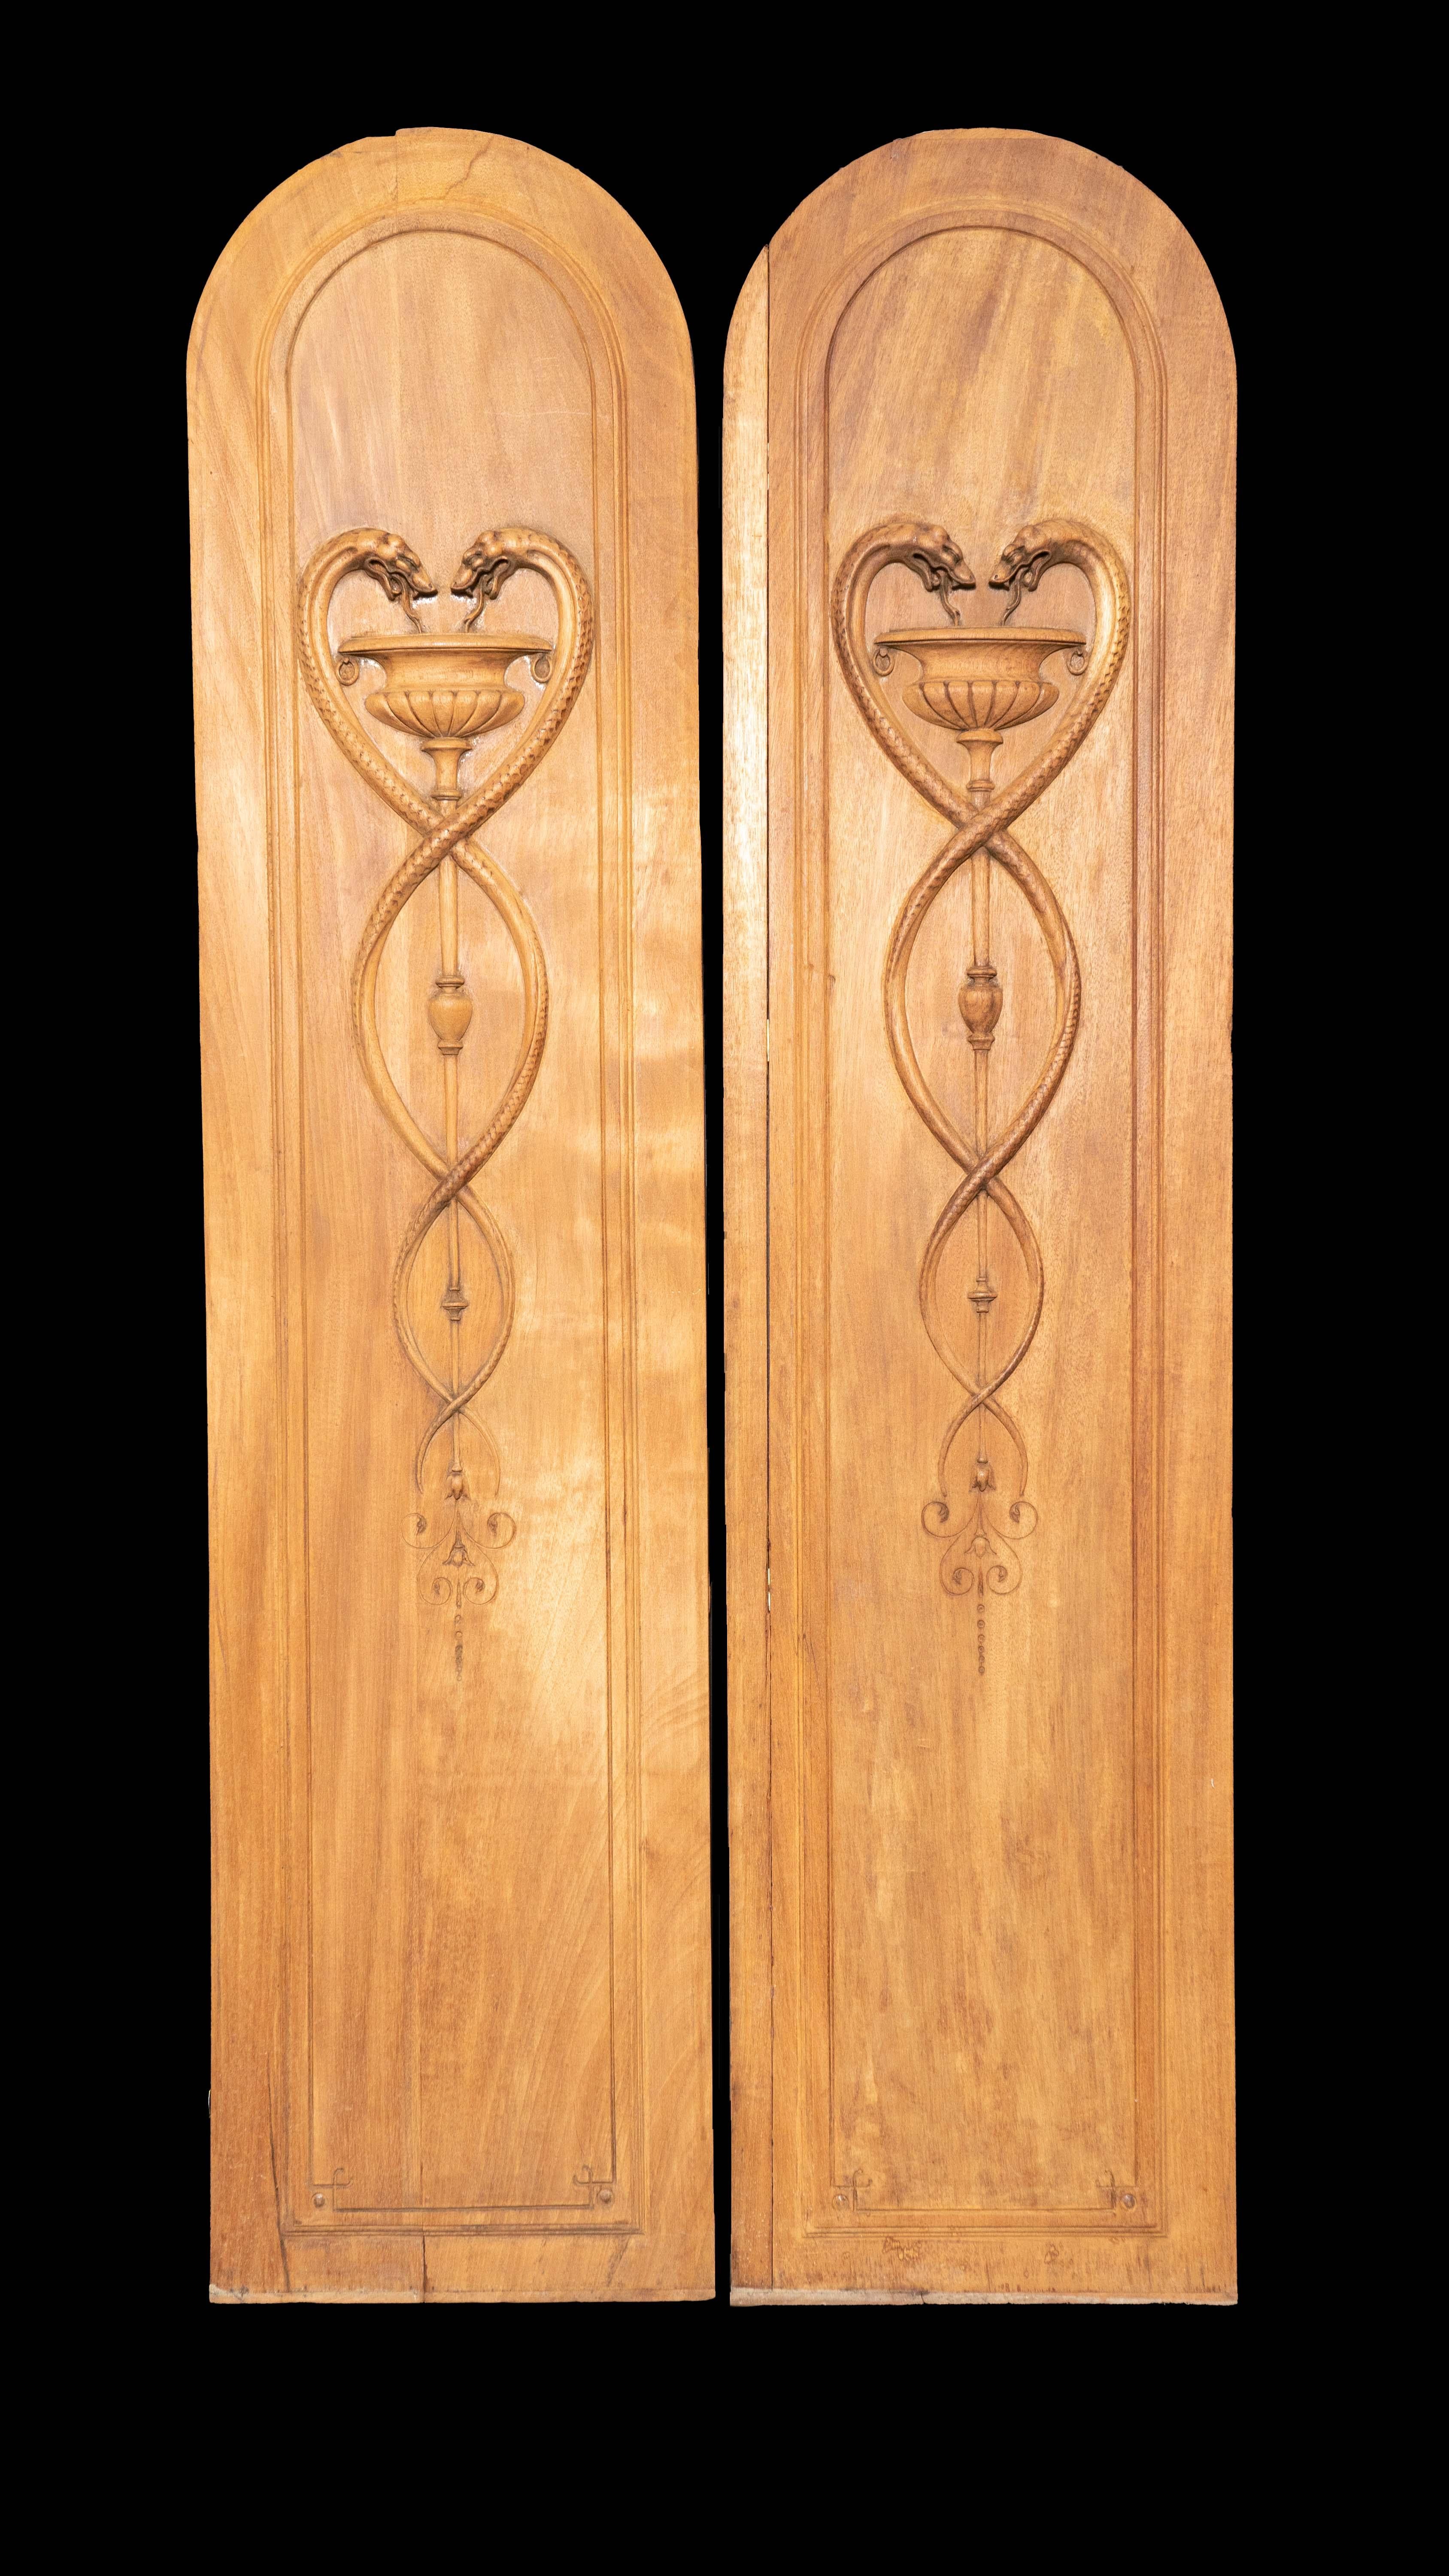 Large pair of 19th century French carved wood pharmacy panels with bowl of Hygieia symbol. 

Bowl of Hygieia is one of the symbols of pharmacology. It is one of the most ancient and important symbols related to medicine in western